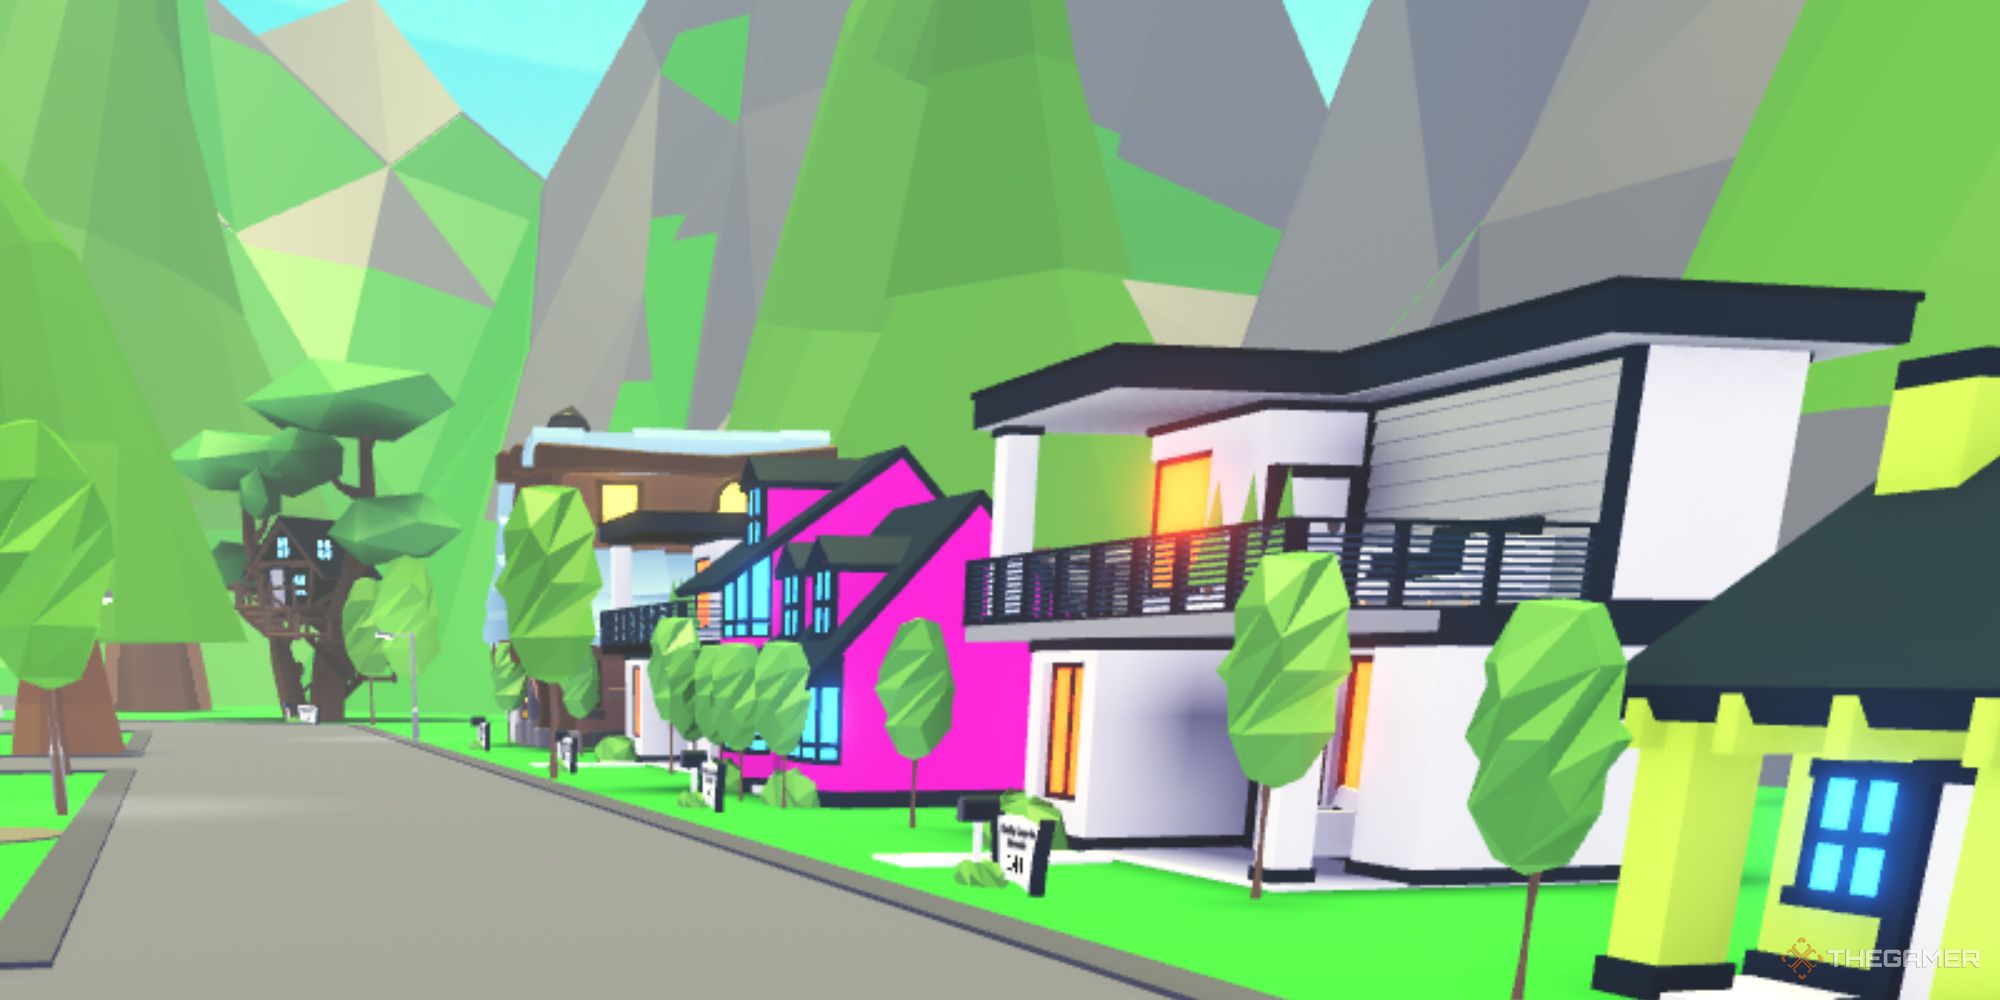 A screenshot from the Roblox: Adopt Me game showing a street filled with different homes of shapes, sizes, and colors. Trees, foliage, and rocky surfaces surround the house.